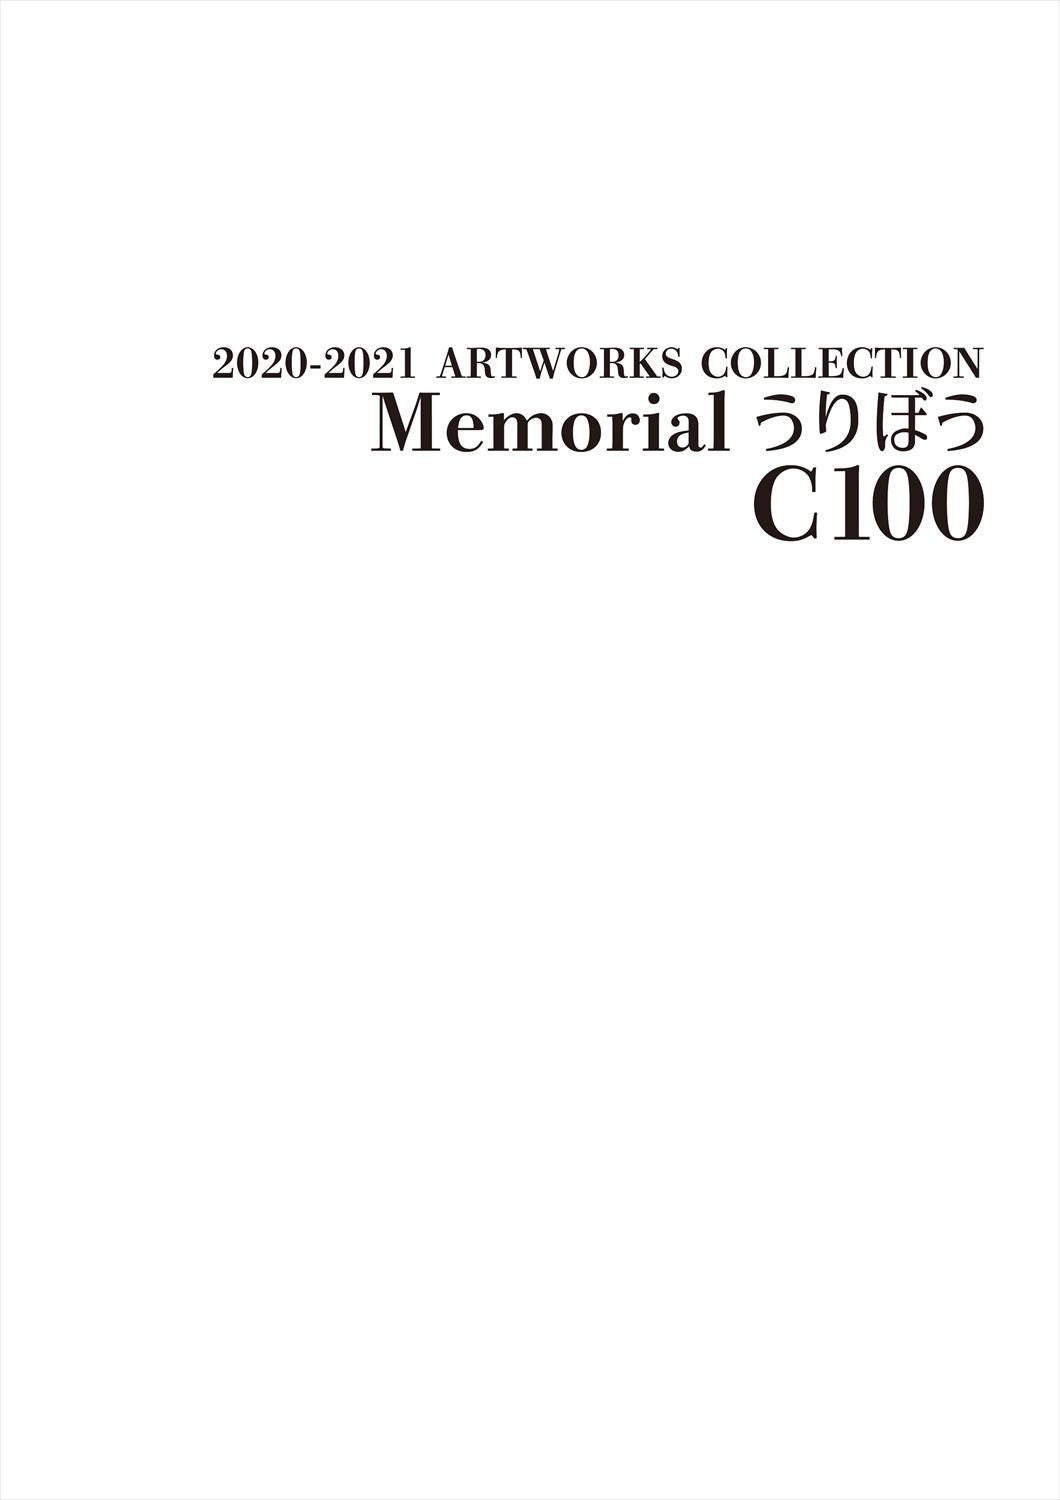 Best Blowjobs 「C100 Memorial うりぼう 2020-2021ARTWORKS COLLECTION」 Free Blow Job Porn - Page 2